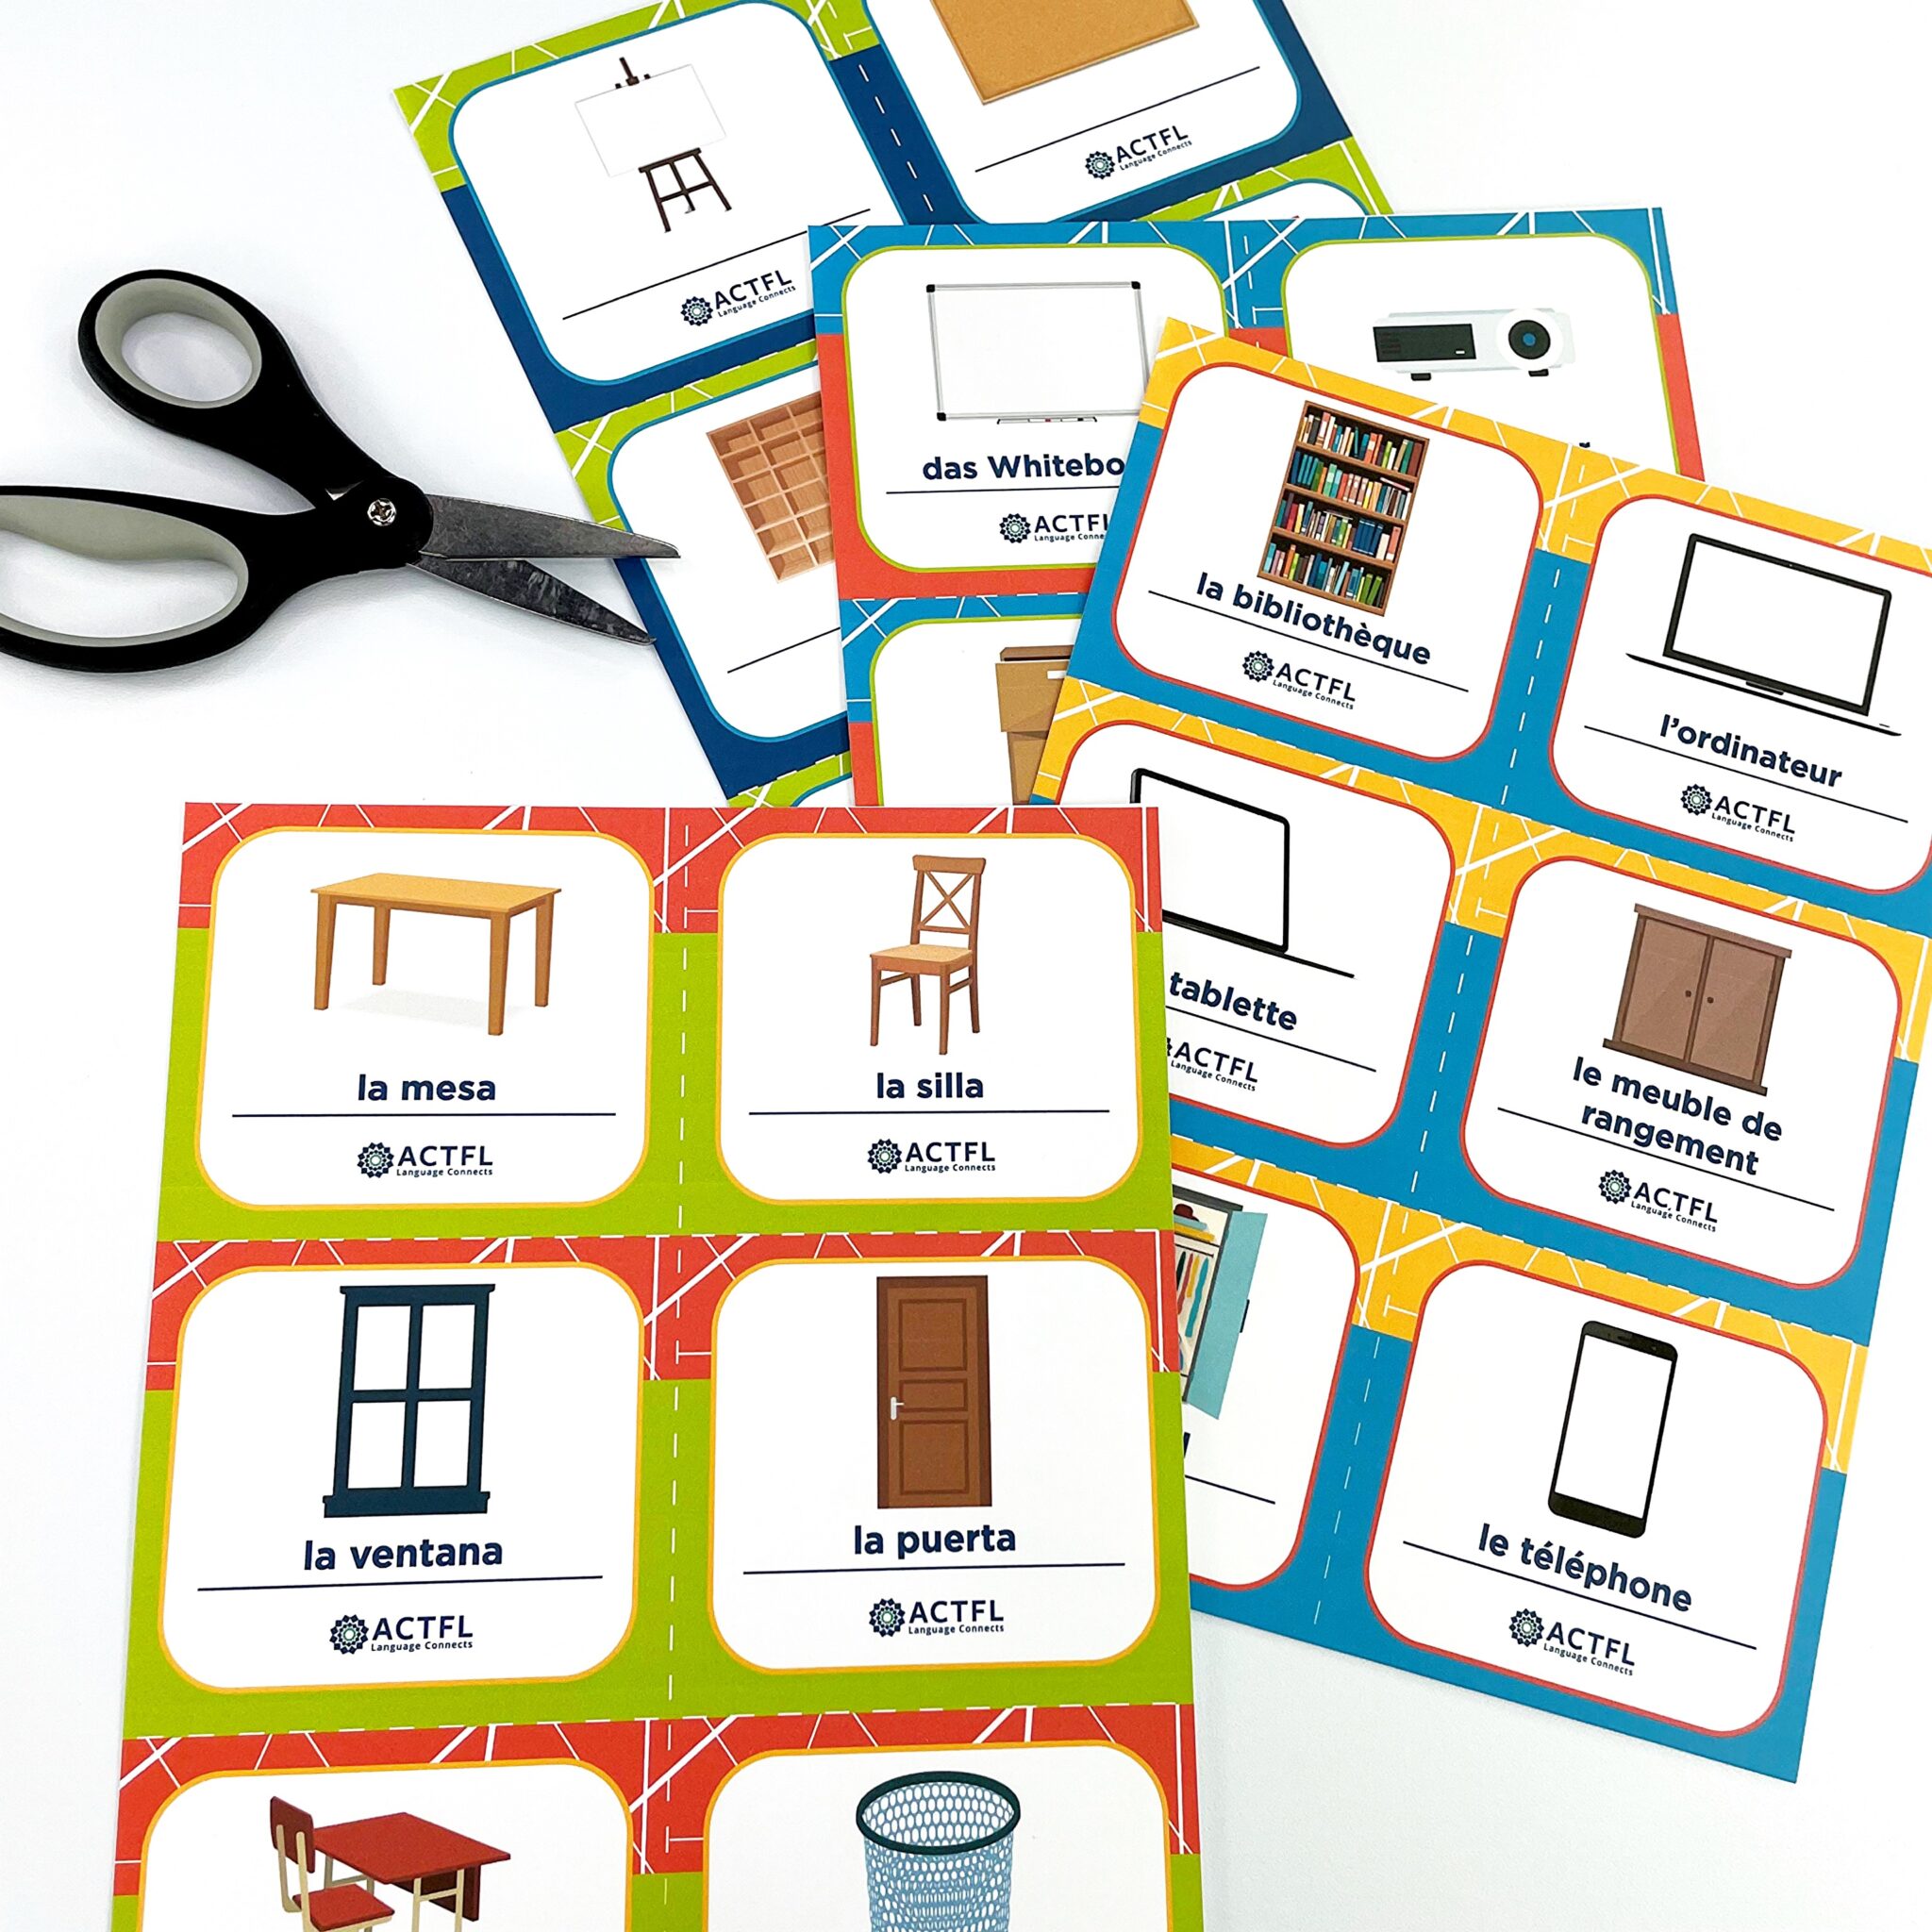 world-language-labels-free-printable-for-school-or-home